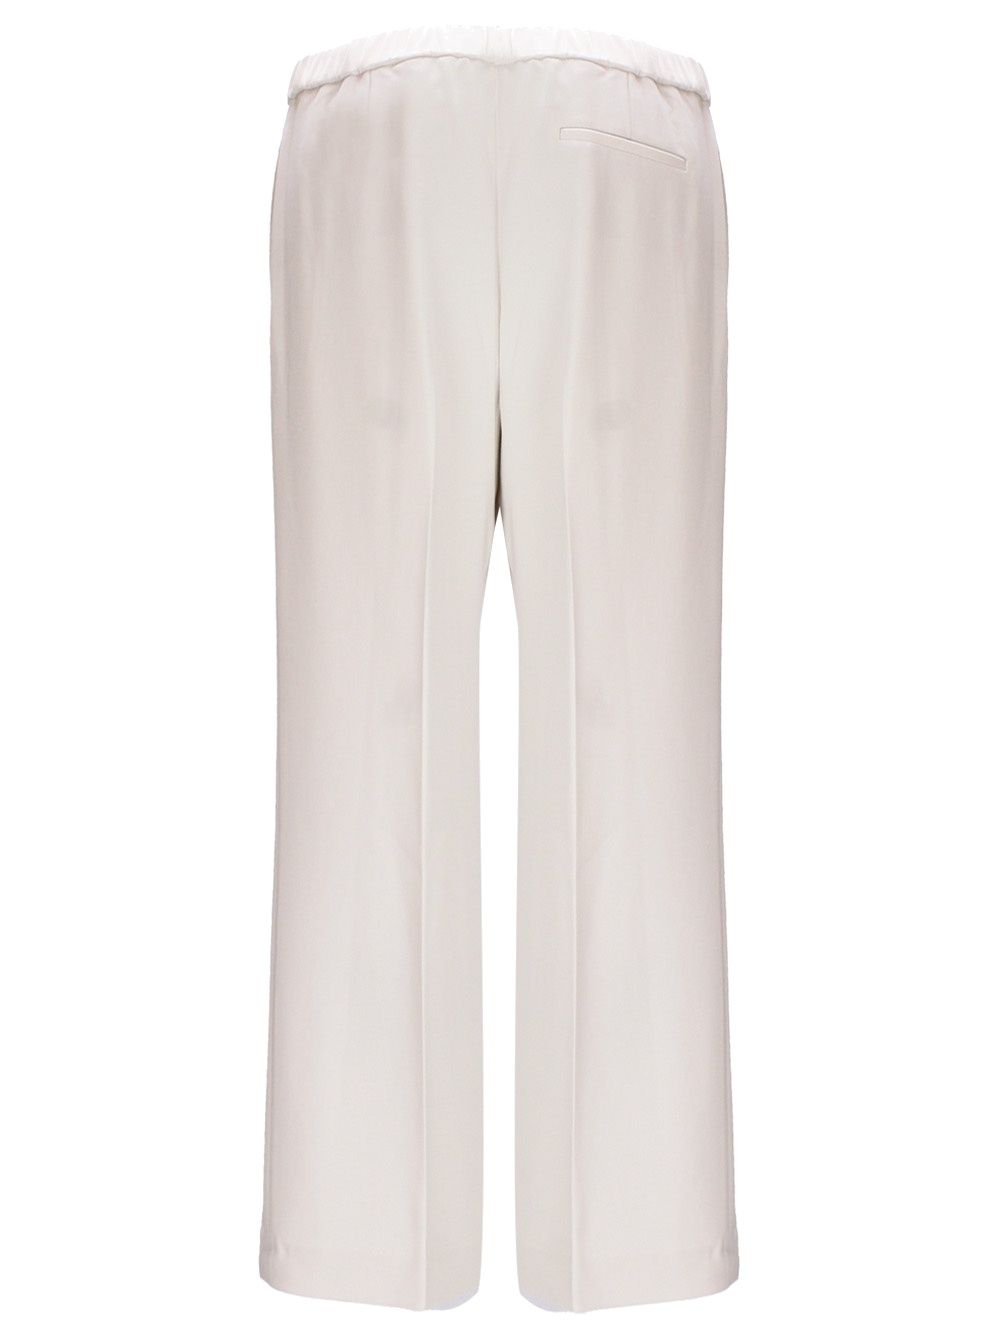 Theory Beige Trousers